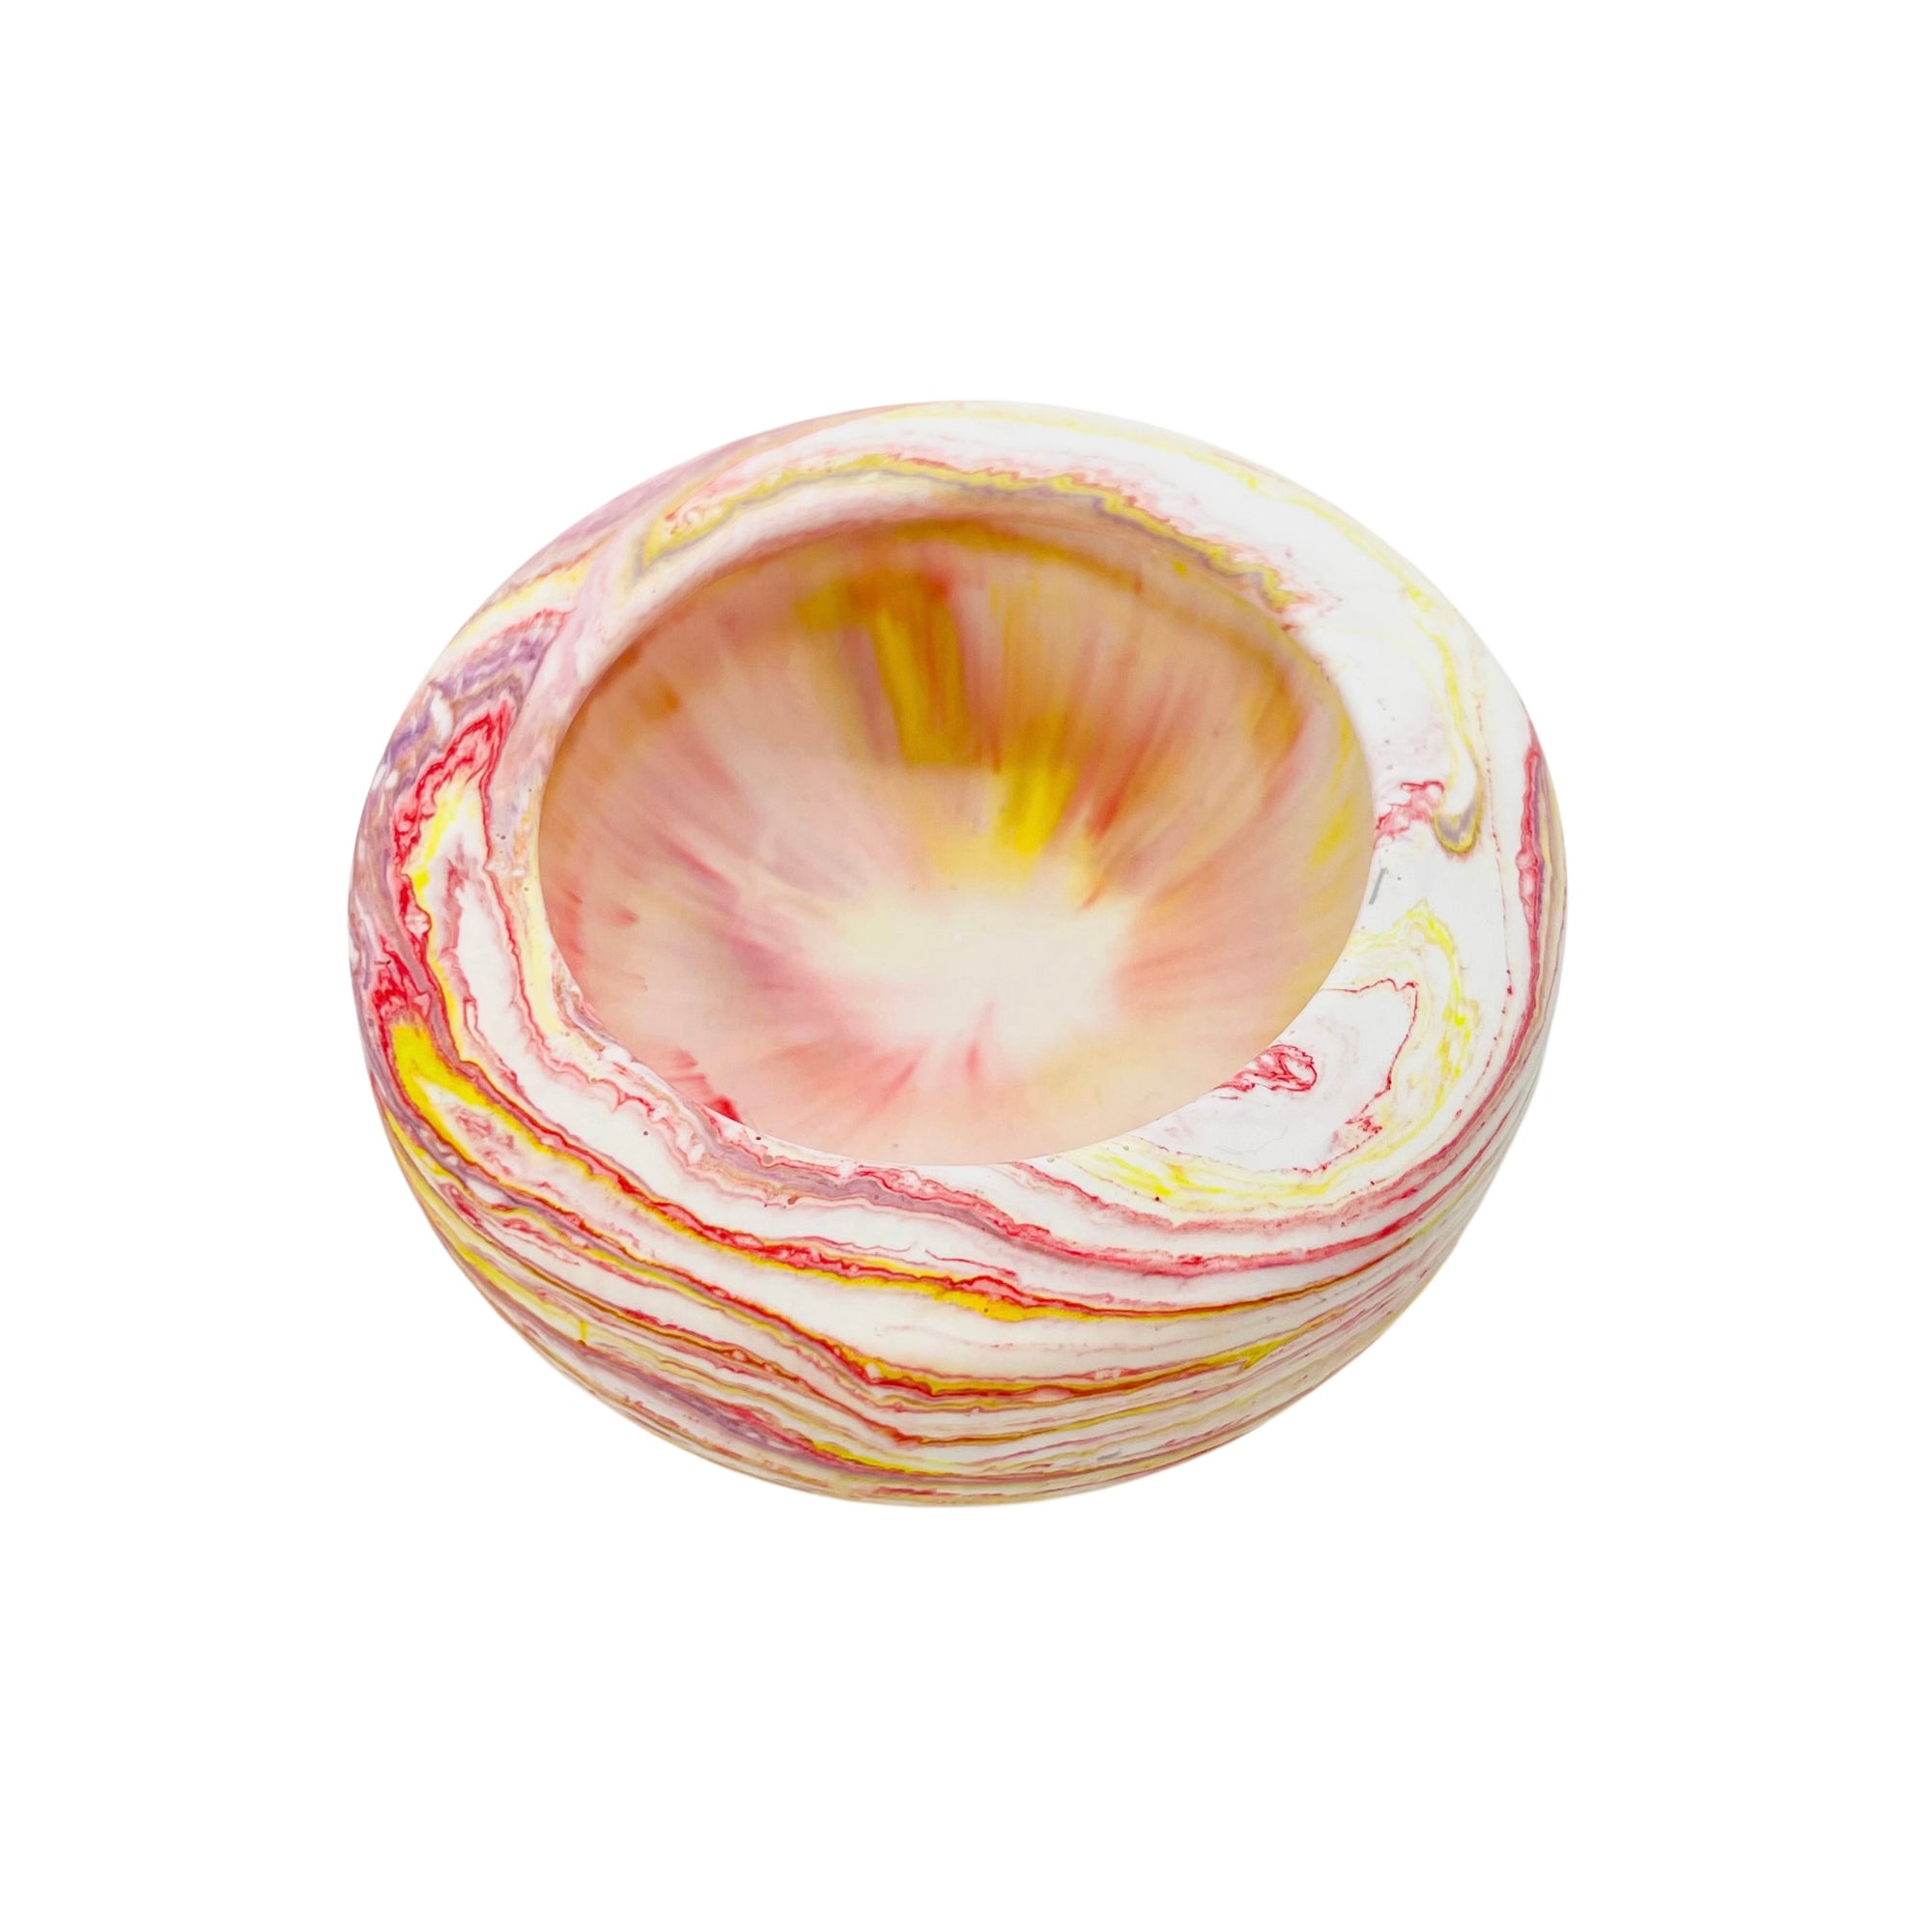 This small round jesmonite bowl measuring 10cm in diameter is marbled with coral and yellow pigment.